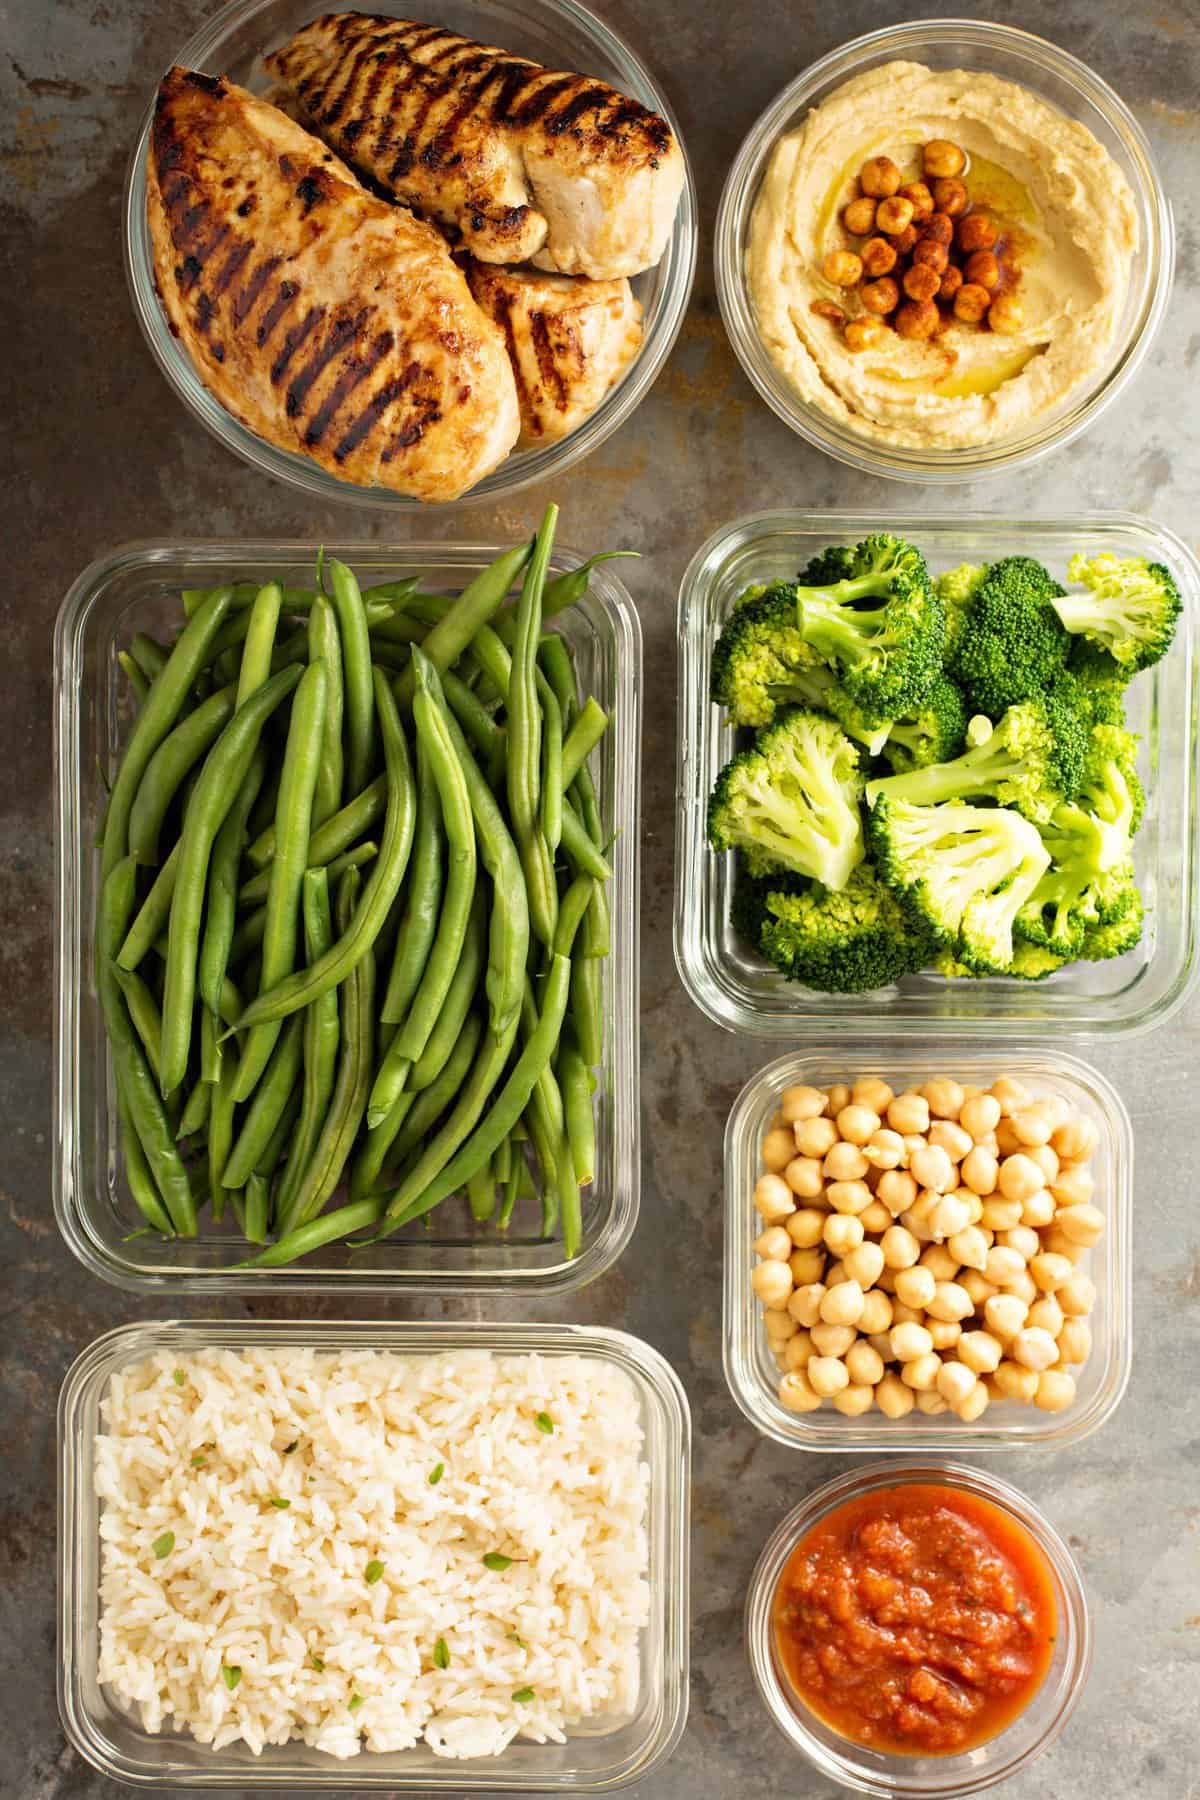 Containers with meal prepped food.